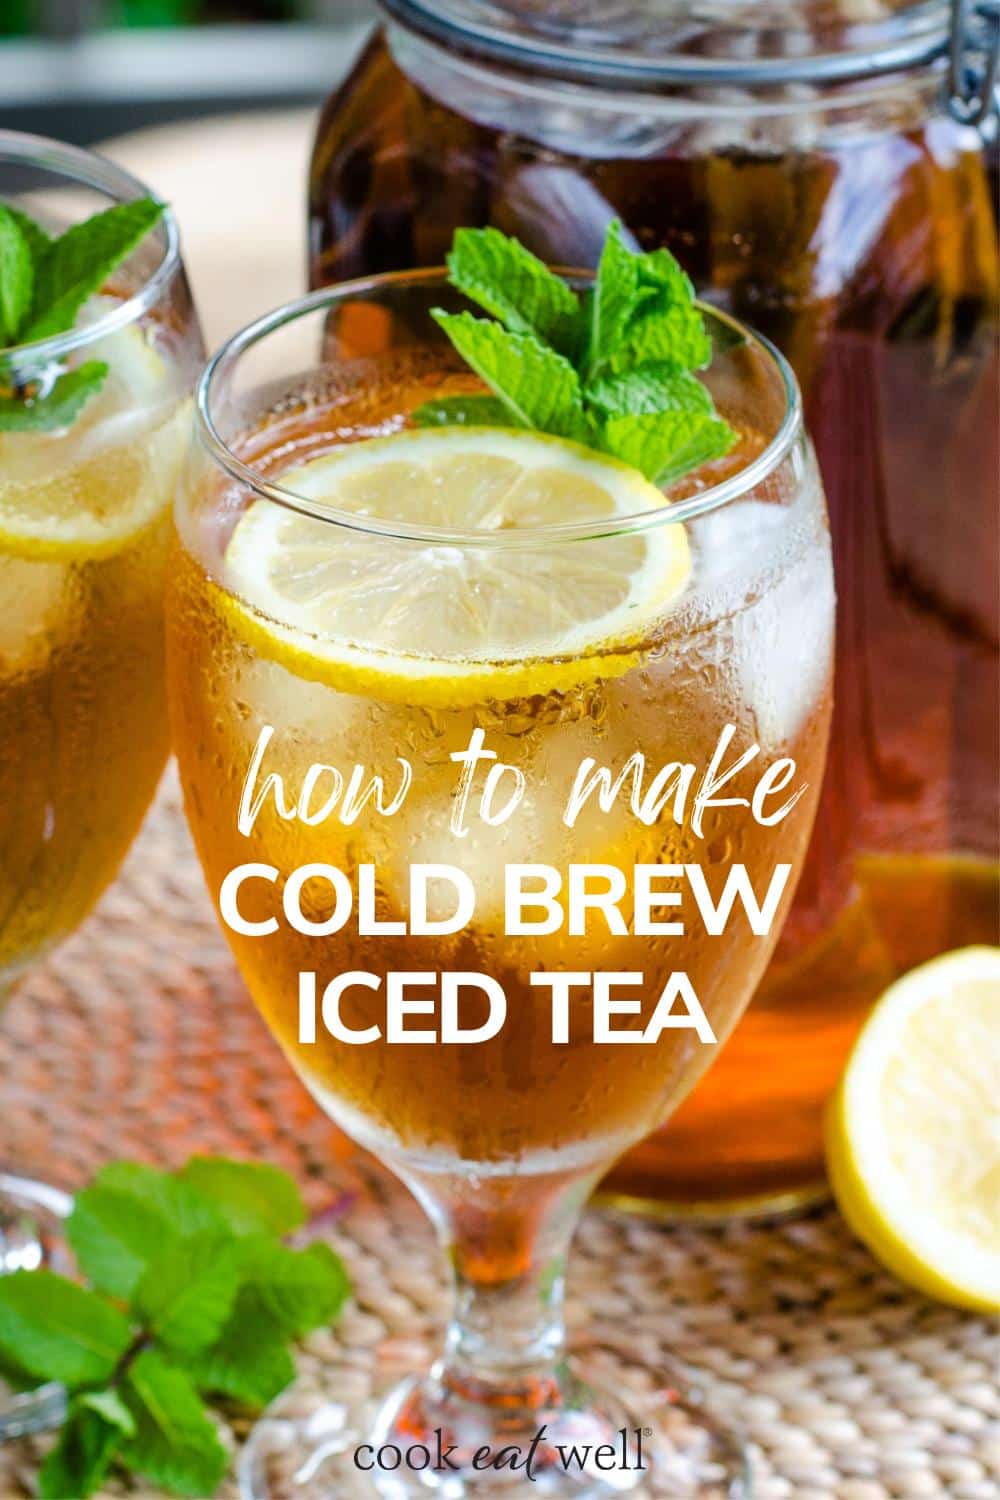 How to make cold brew iced tea